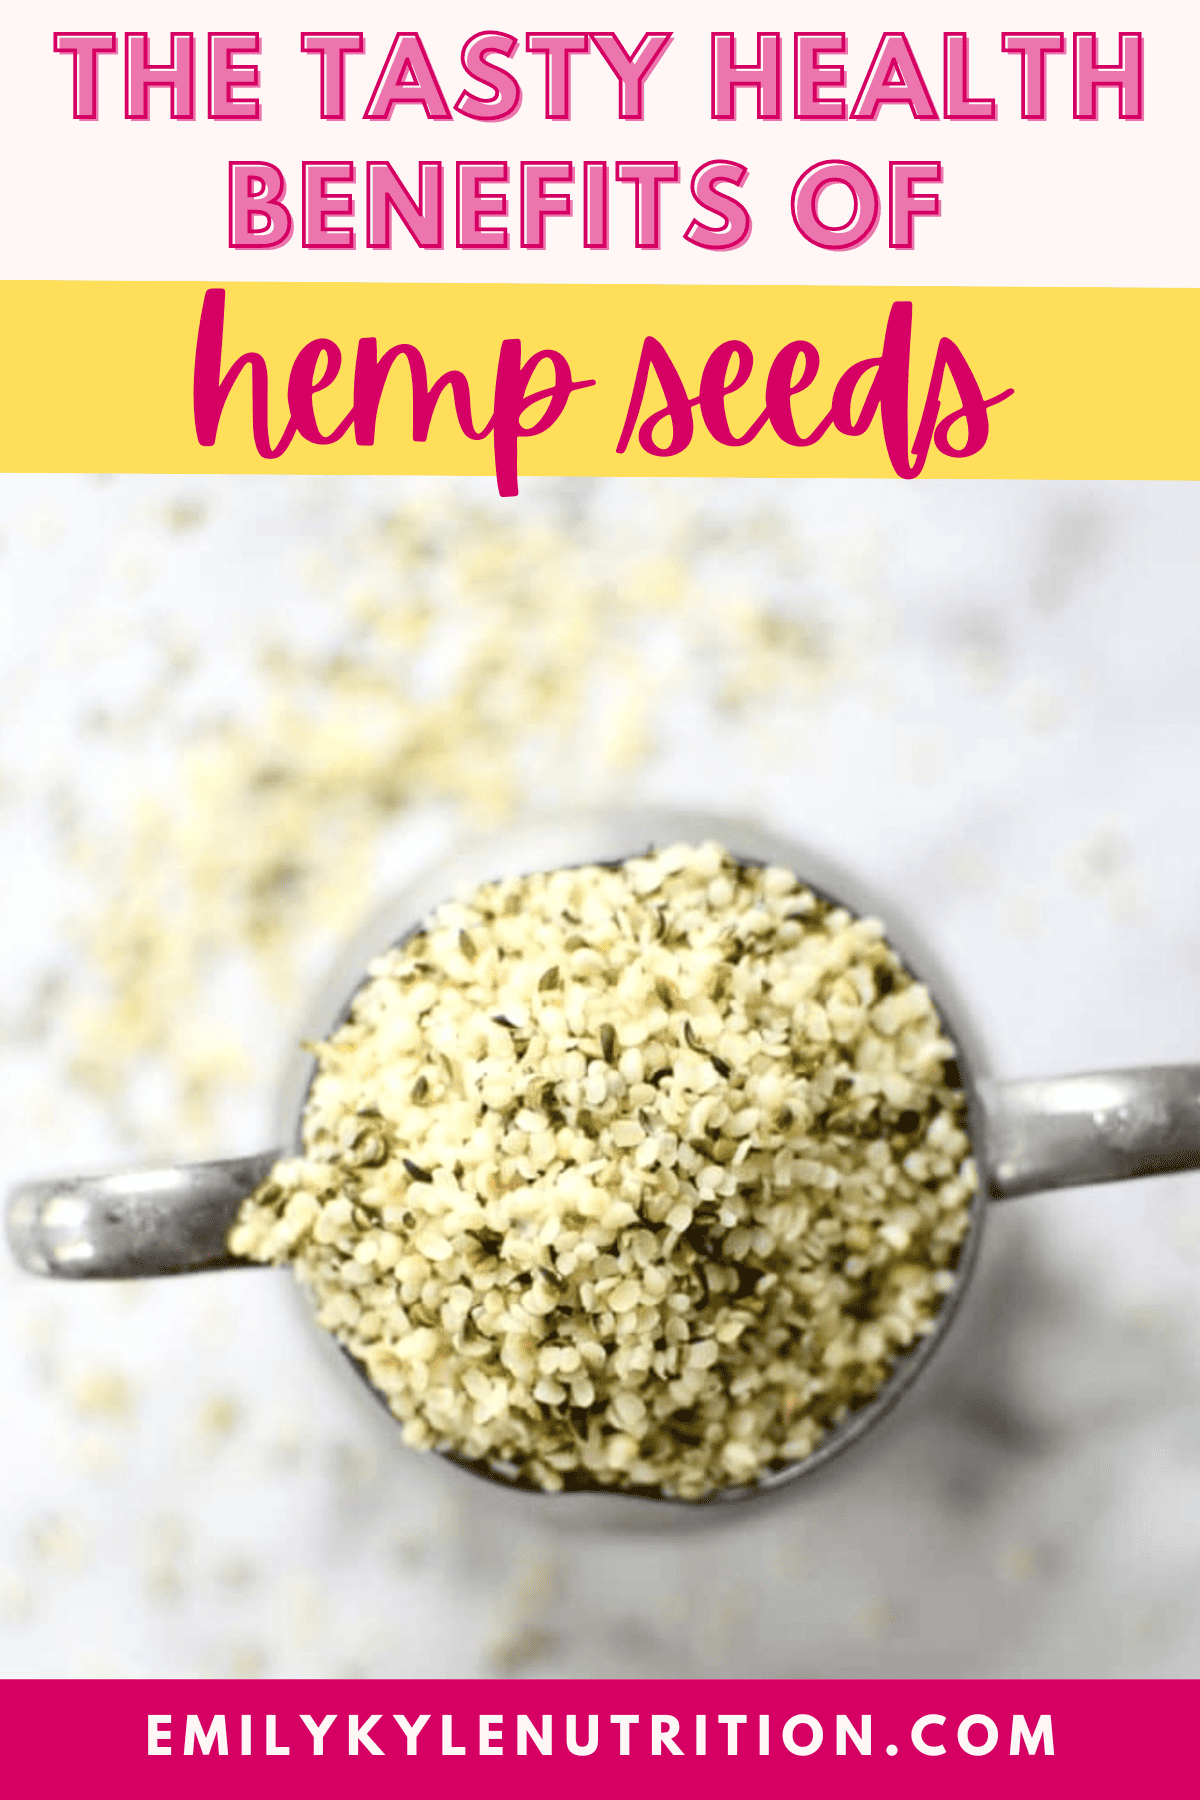 A picture of a cup of hemp seeds that says the health benefits of hemp seeds